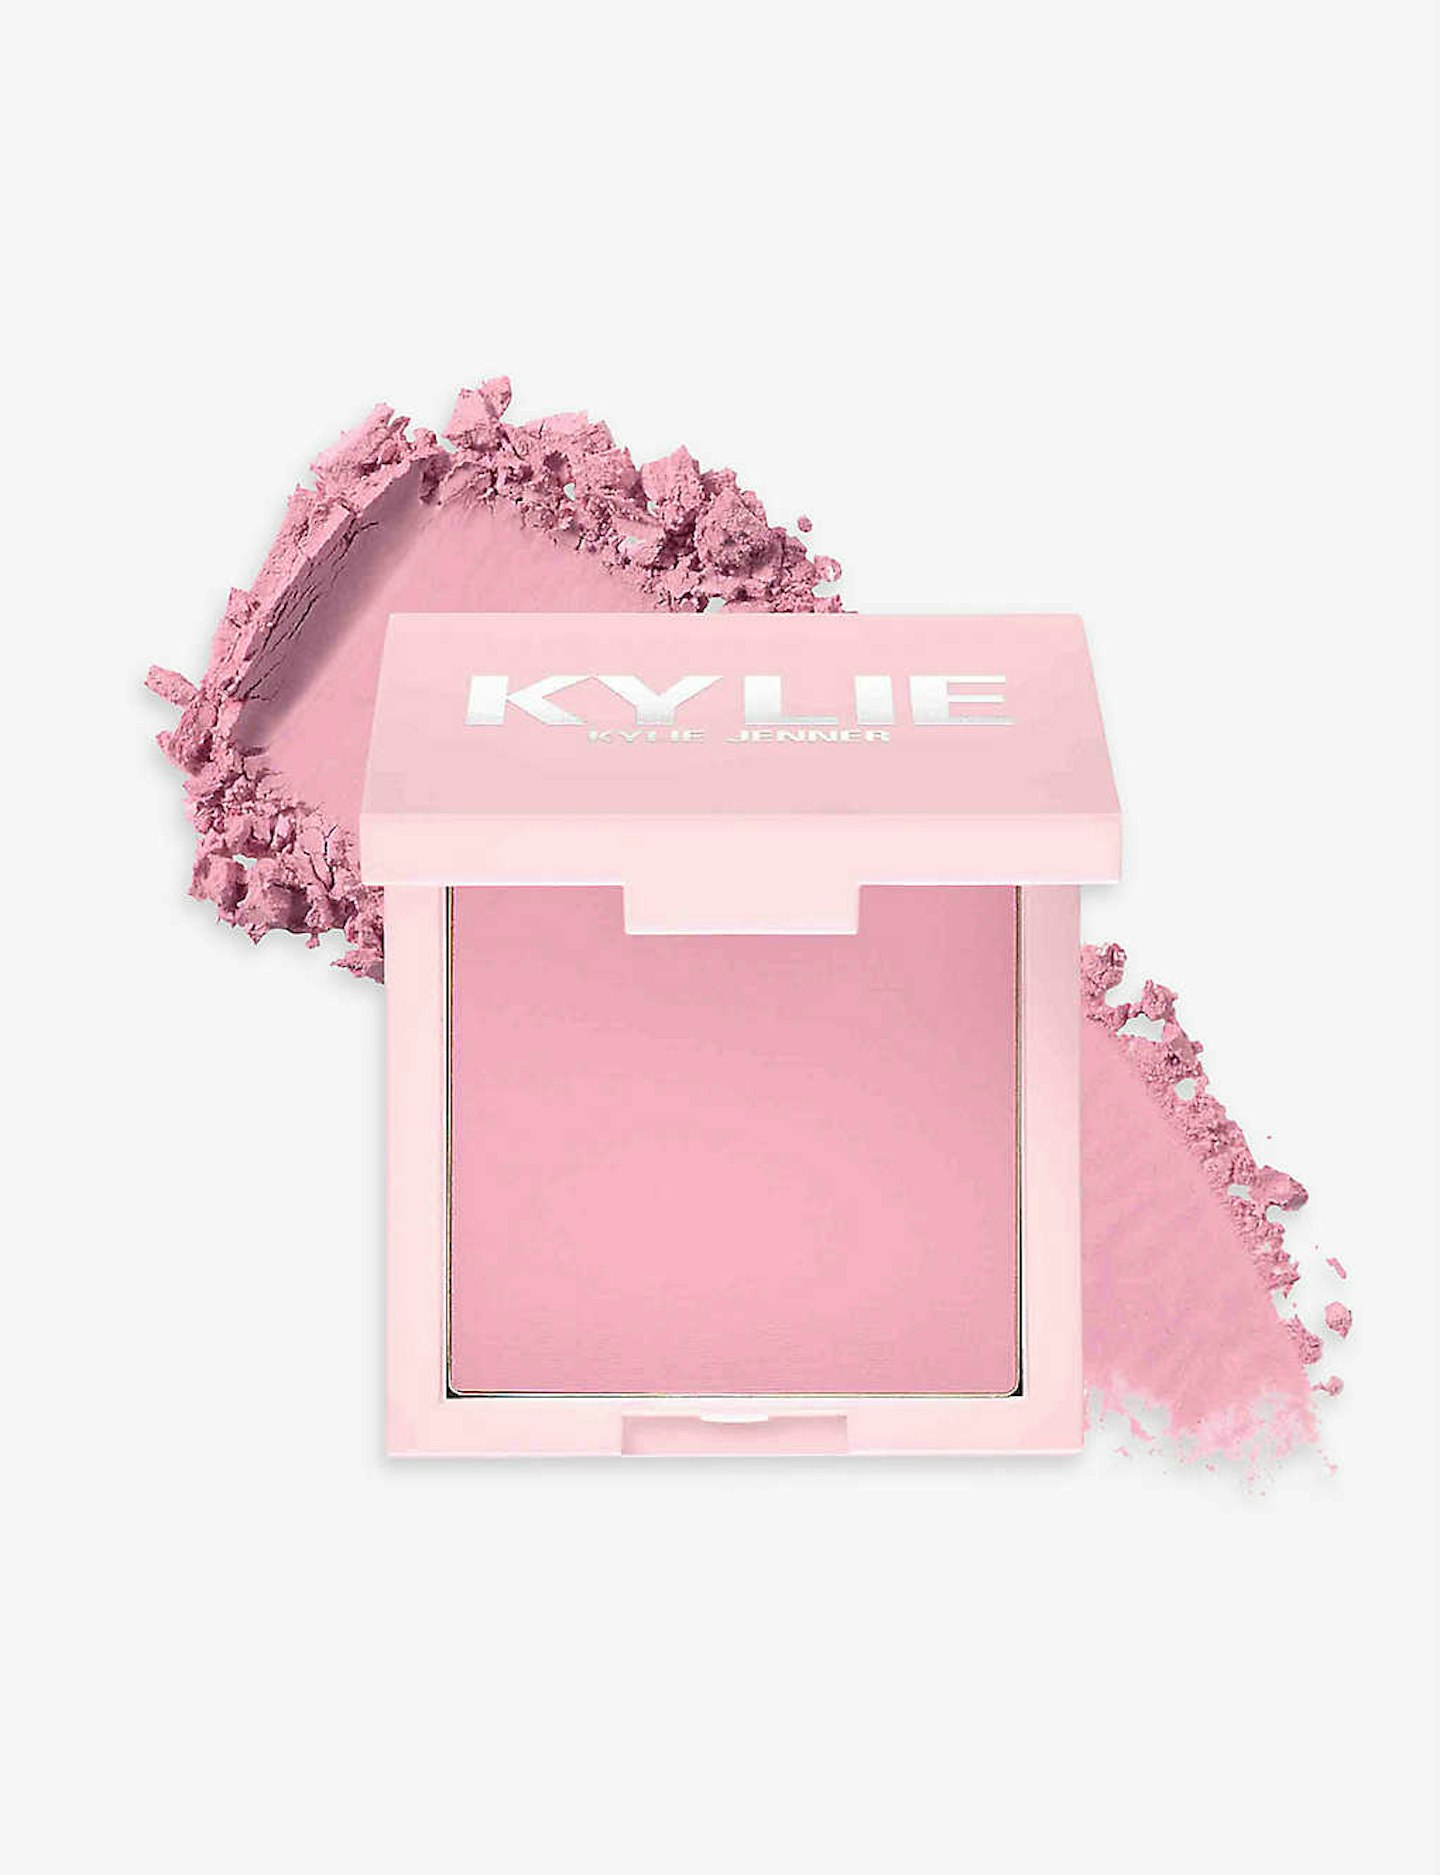 Kylie by Kylie Jenner Pressed Blush Powder in Winter Kiss, £19